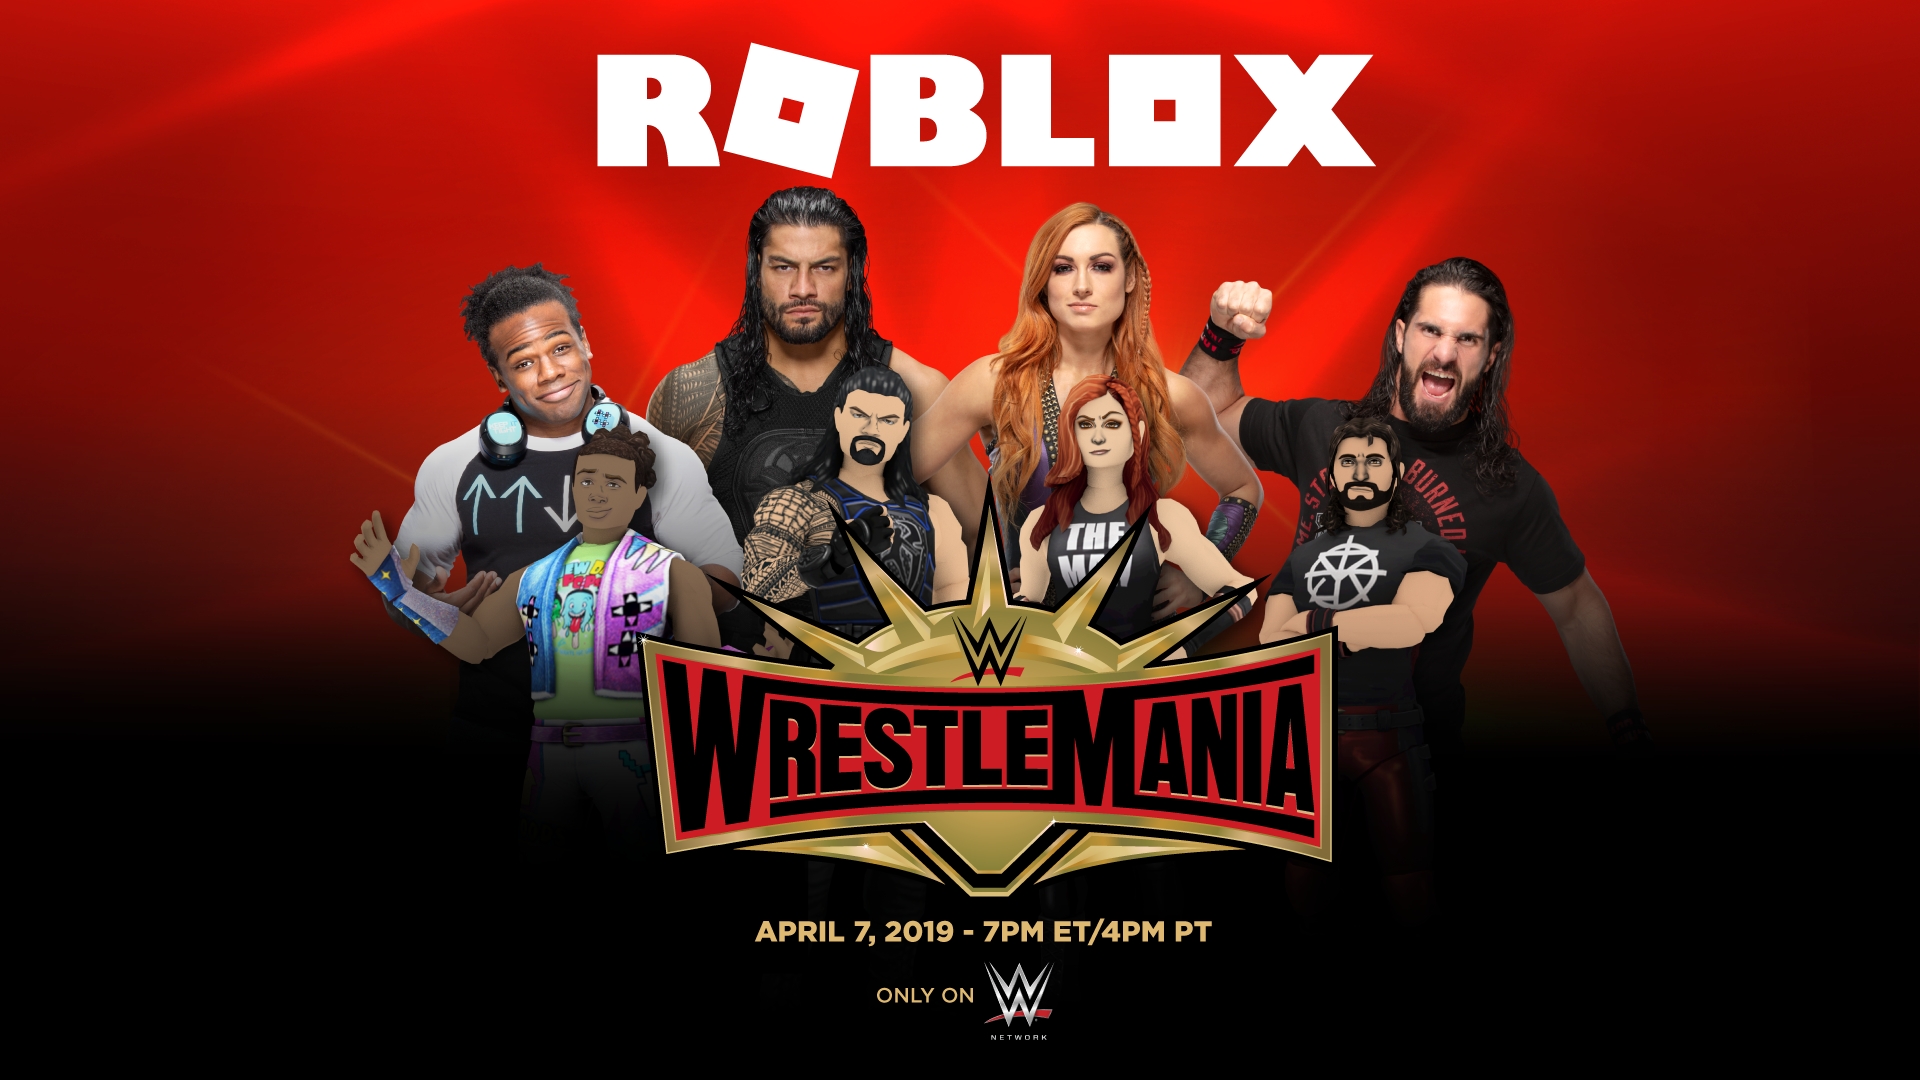 Roblox And Wwe Partner To Celebrate Wrestlemania Business Wire - roblox news network